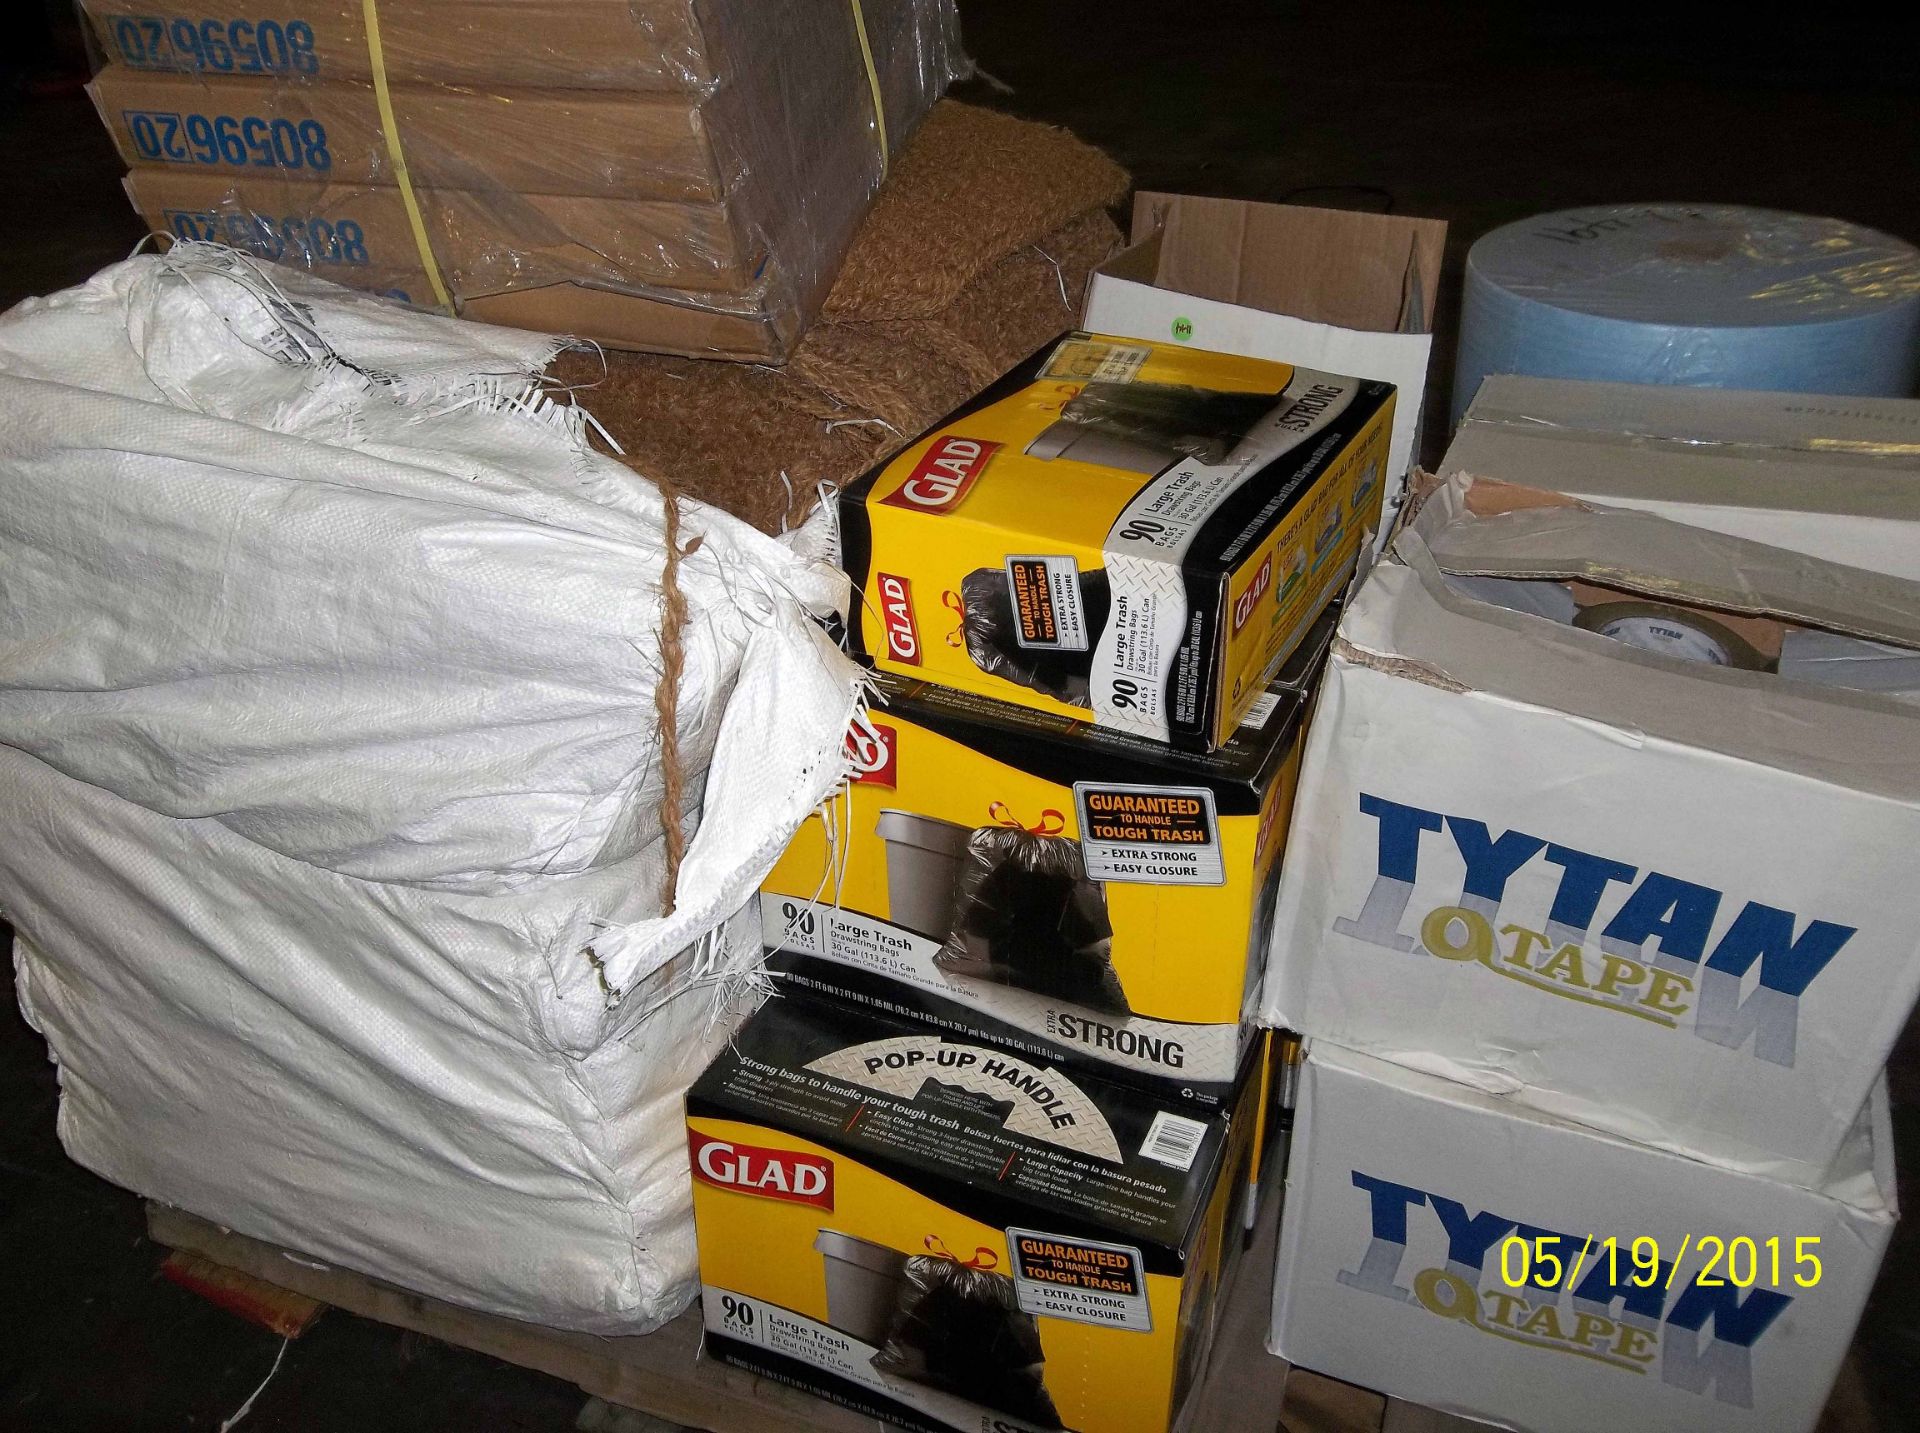 LOT CONSISTING OF PACKING TAPE, TRASH BAGS, COCO MATS, PLASTIC WRAP (for pallets) LOCATED IN